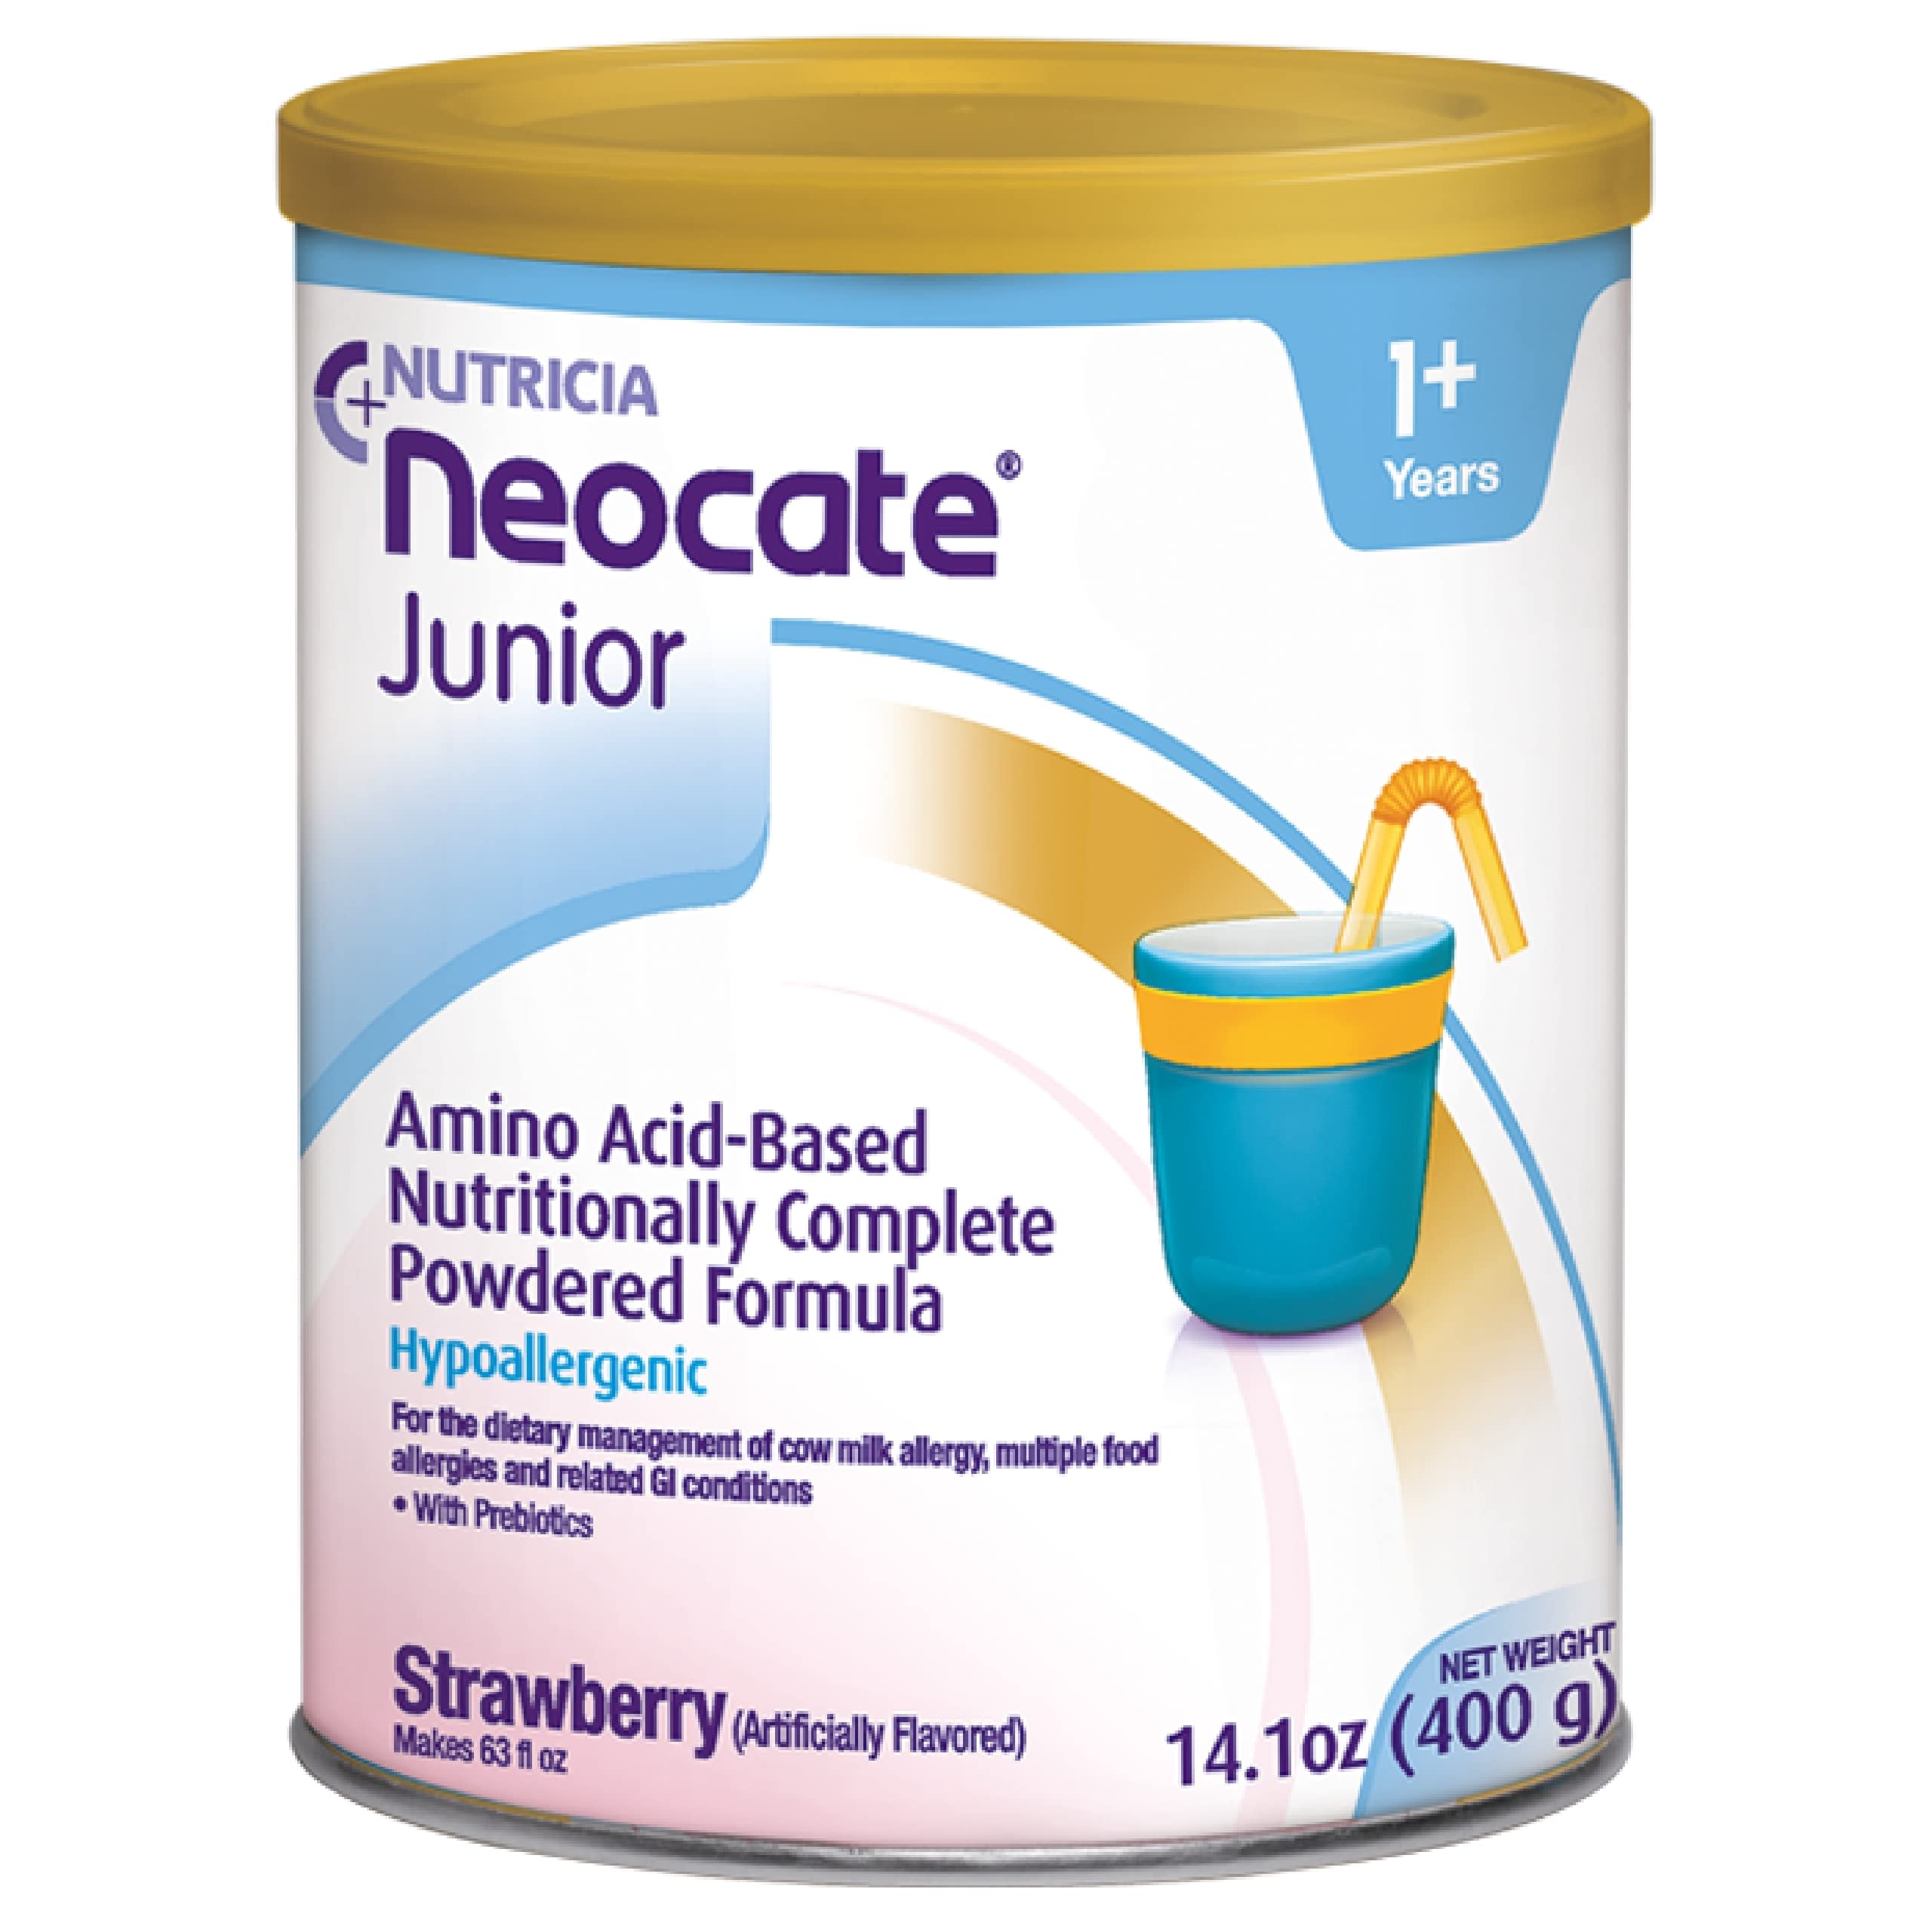 Neocate Junior - Powdered Hypoallergenic, Amino Acid-Based Toddler and Junior Formula - Strawberry - 14.1 Oz Can (Case of 1)